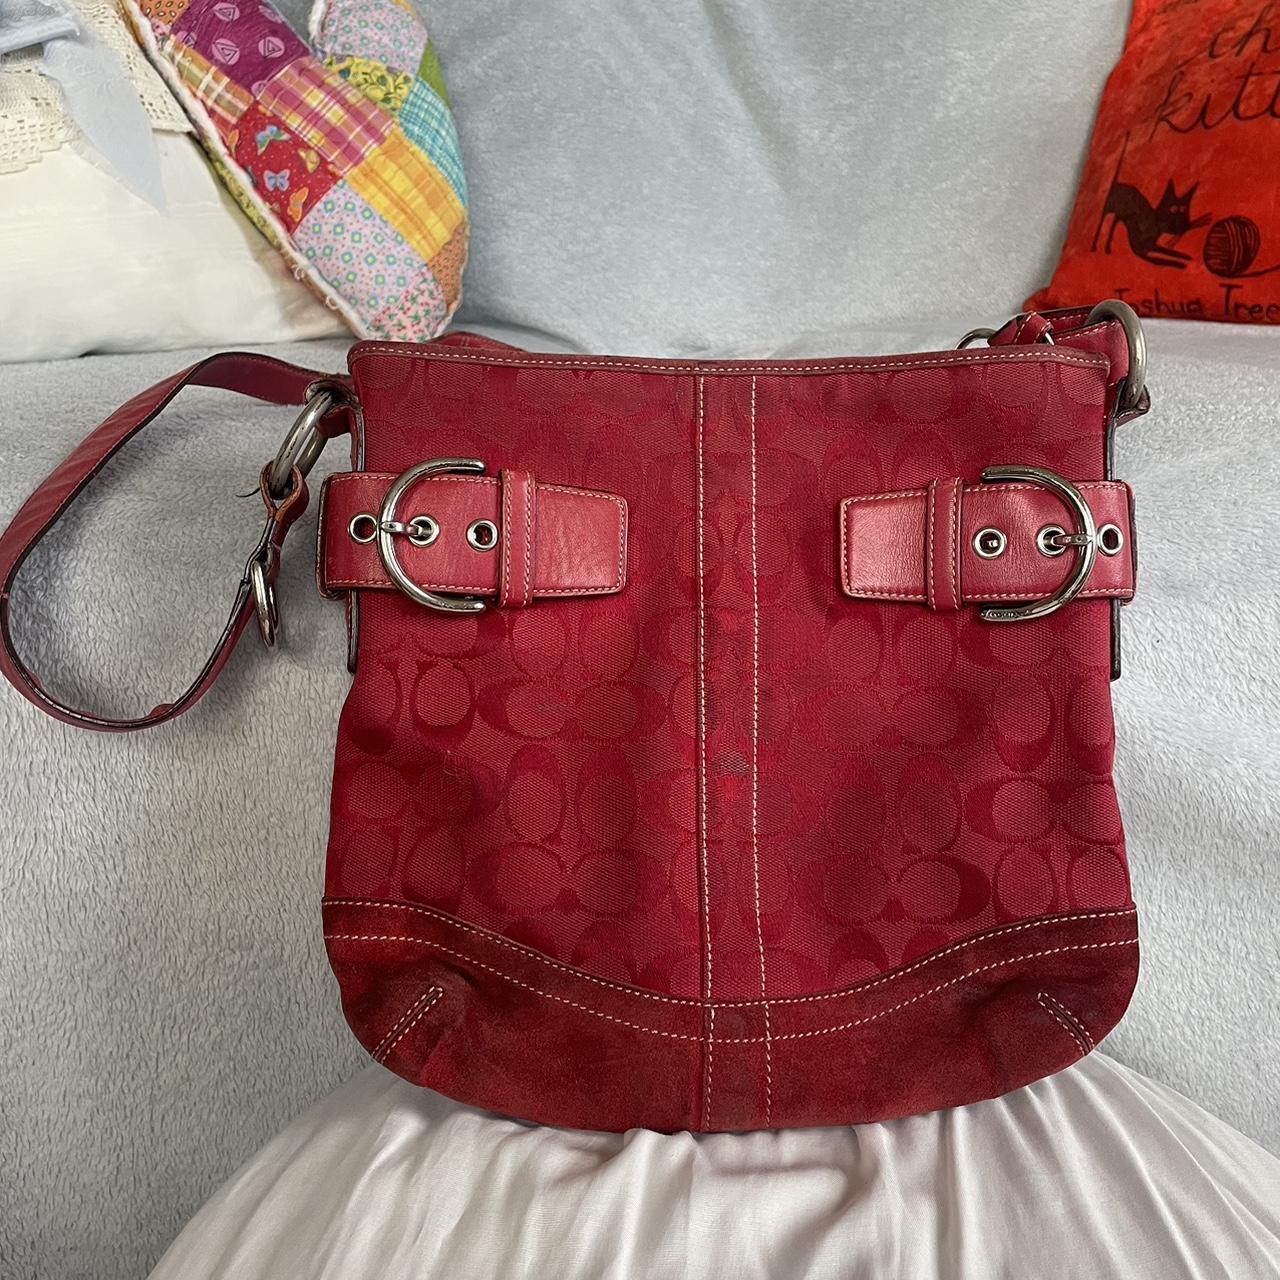 VINTAGE Coach Hobo Soho Shoulder Bag Purse Red Leather G0779-F10909 | Bags,  Pretty bags, Purses and bags